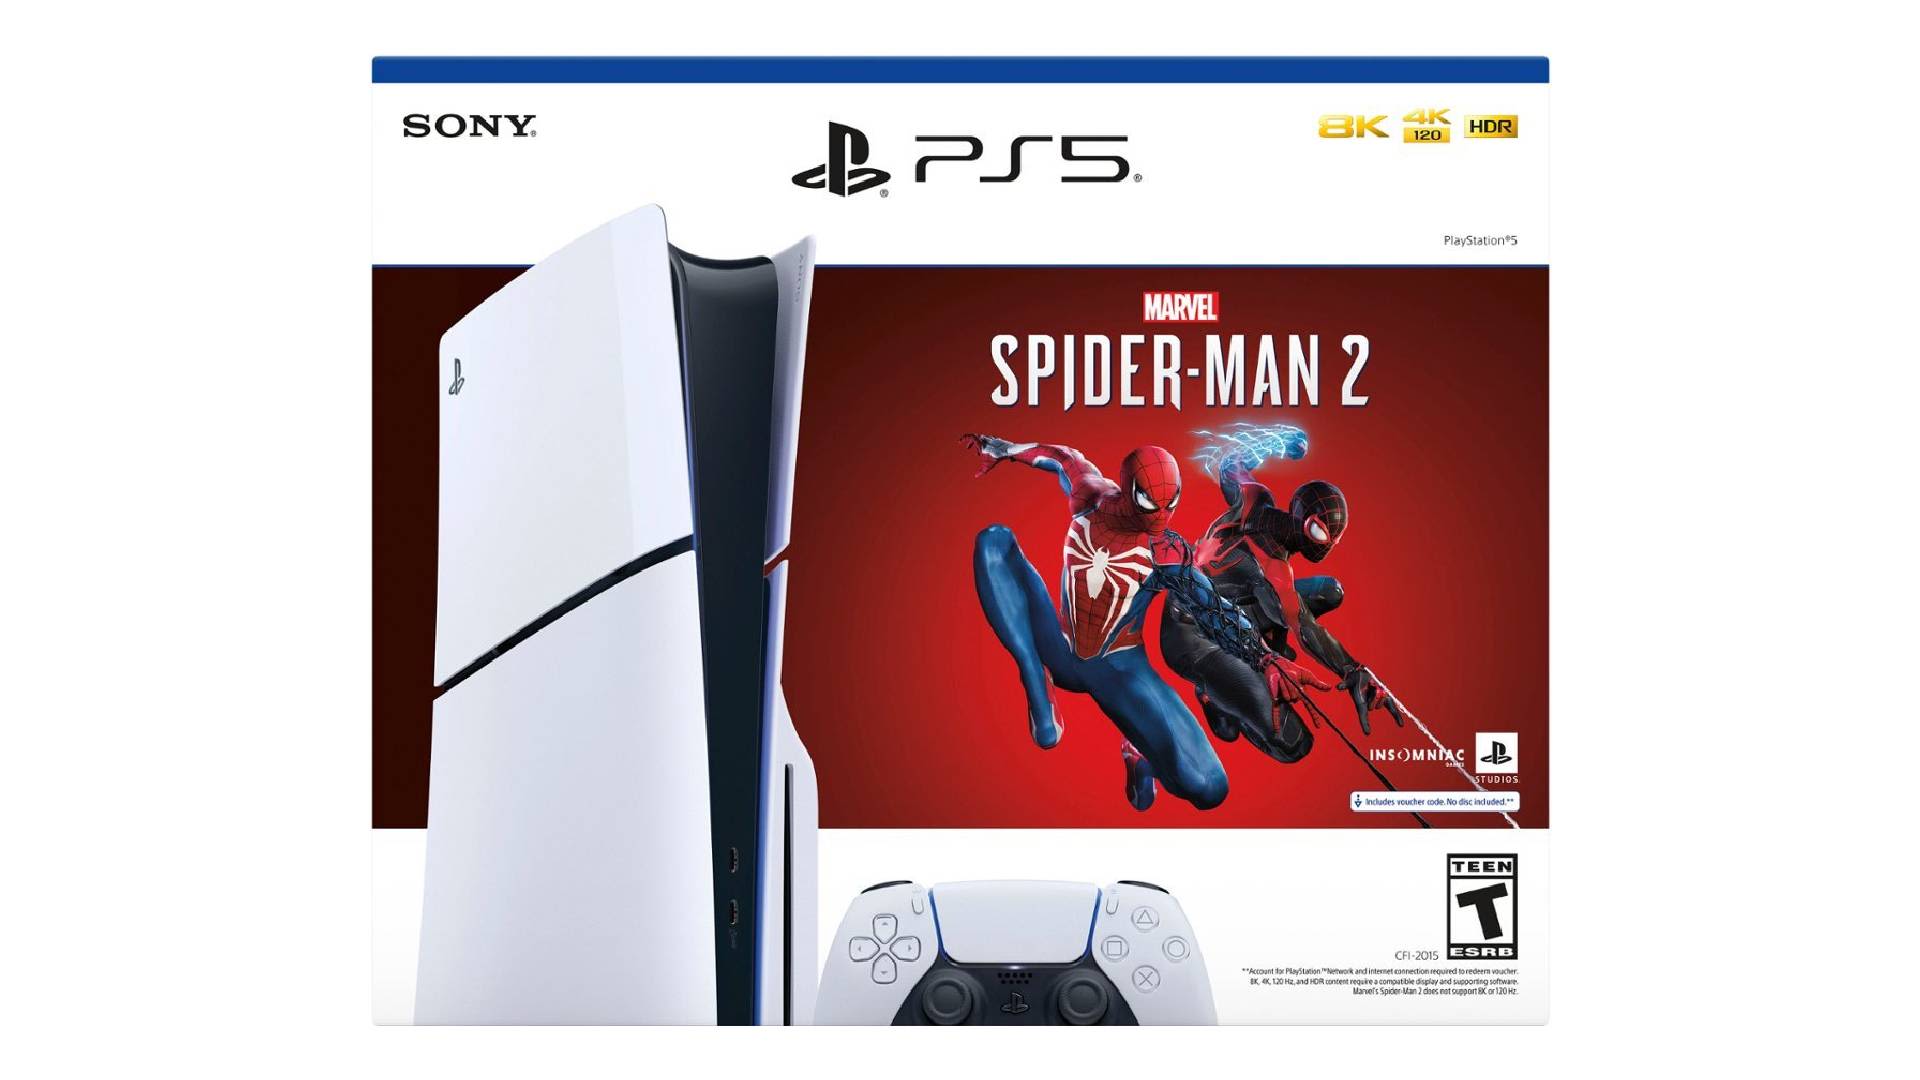 Best PS5 Cyber Monday deals as today's 2023 UK sales go live